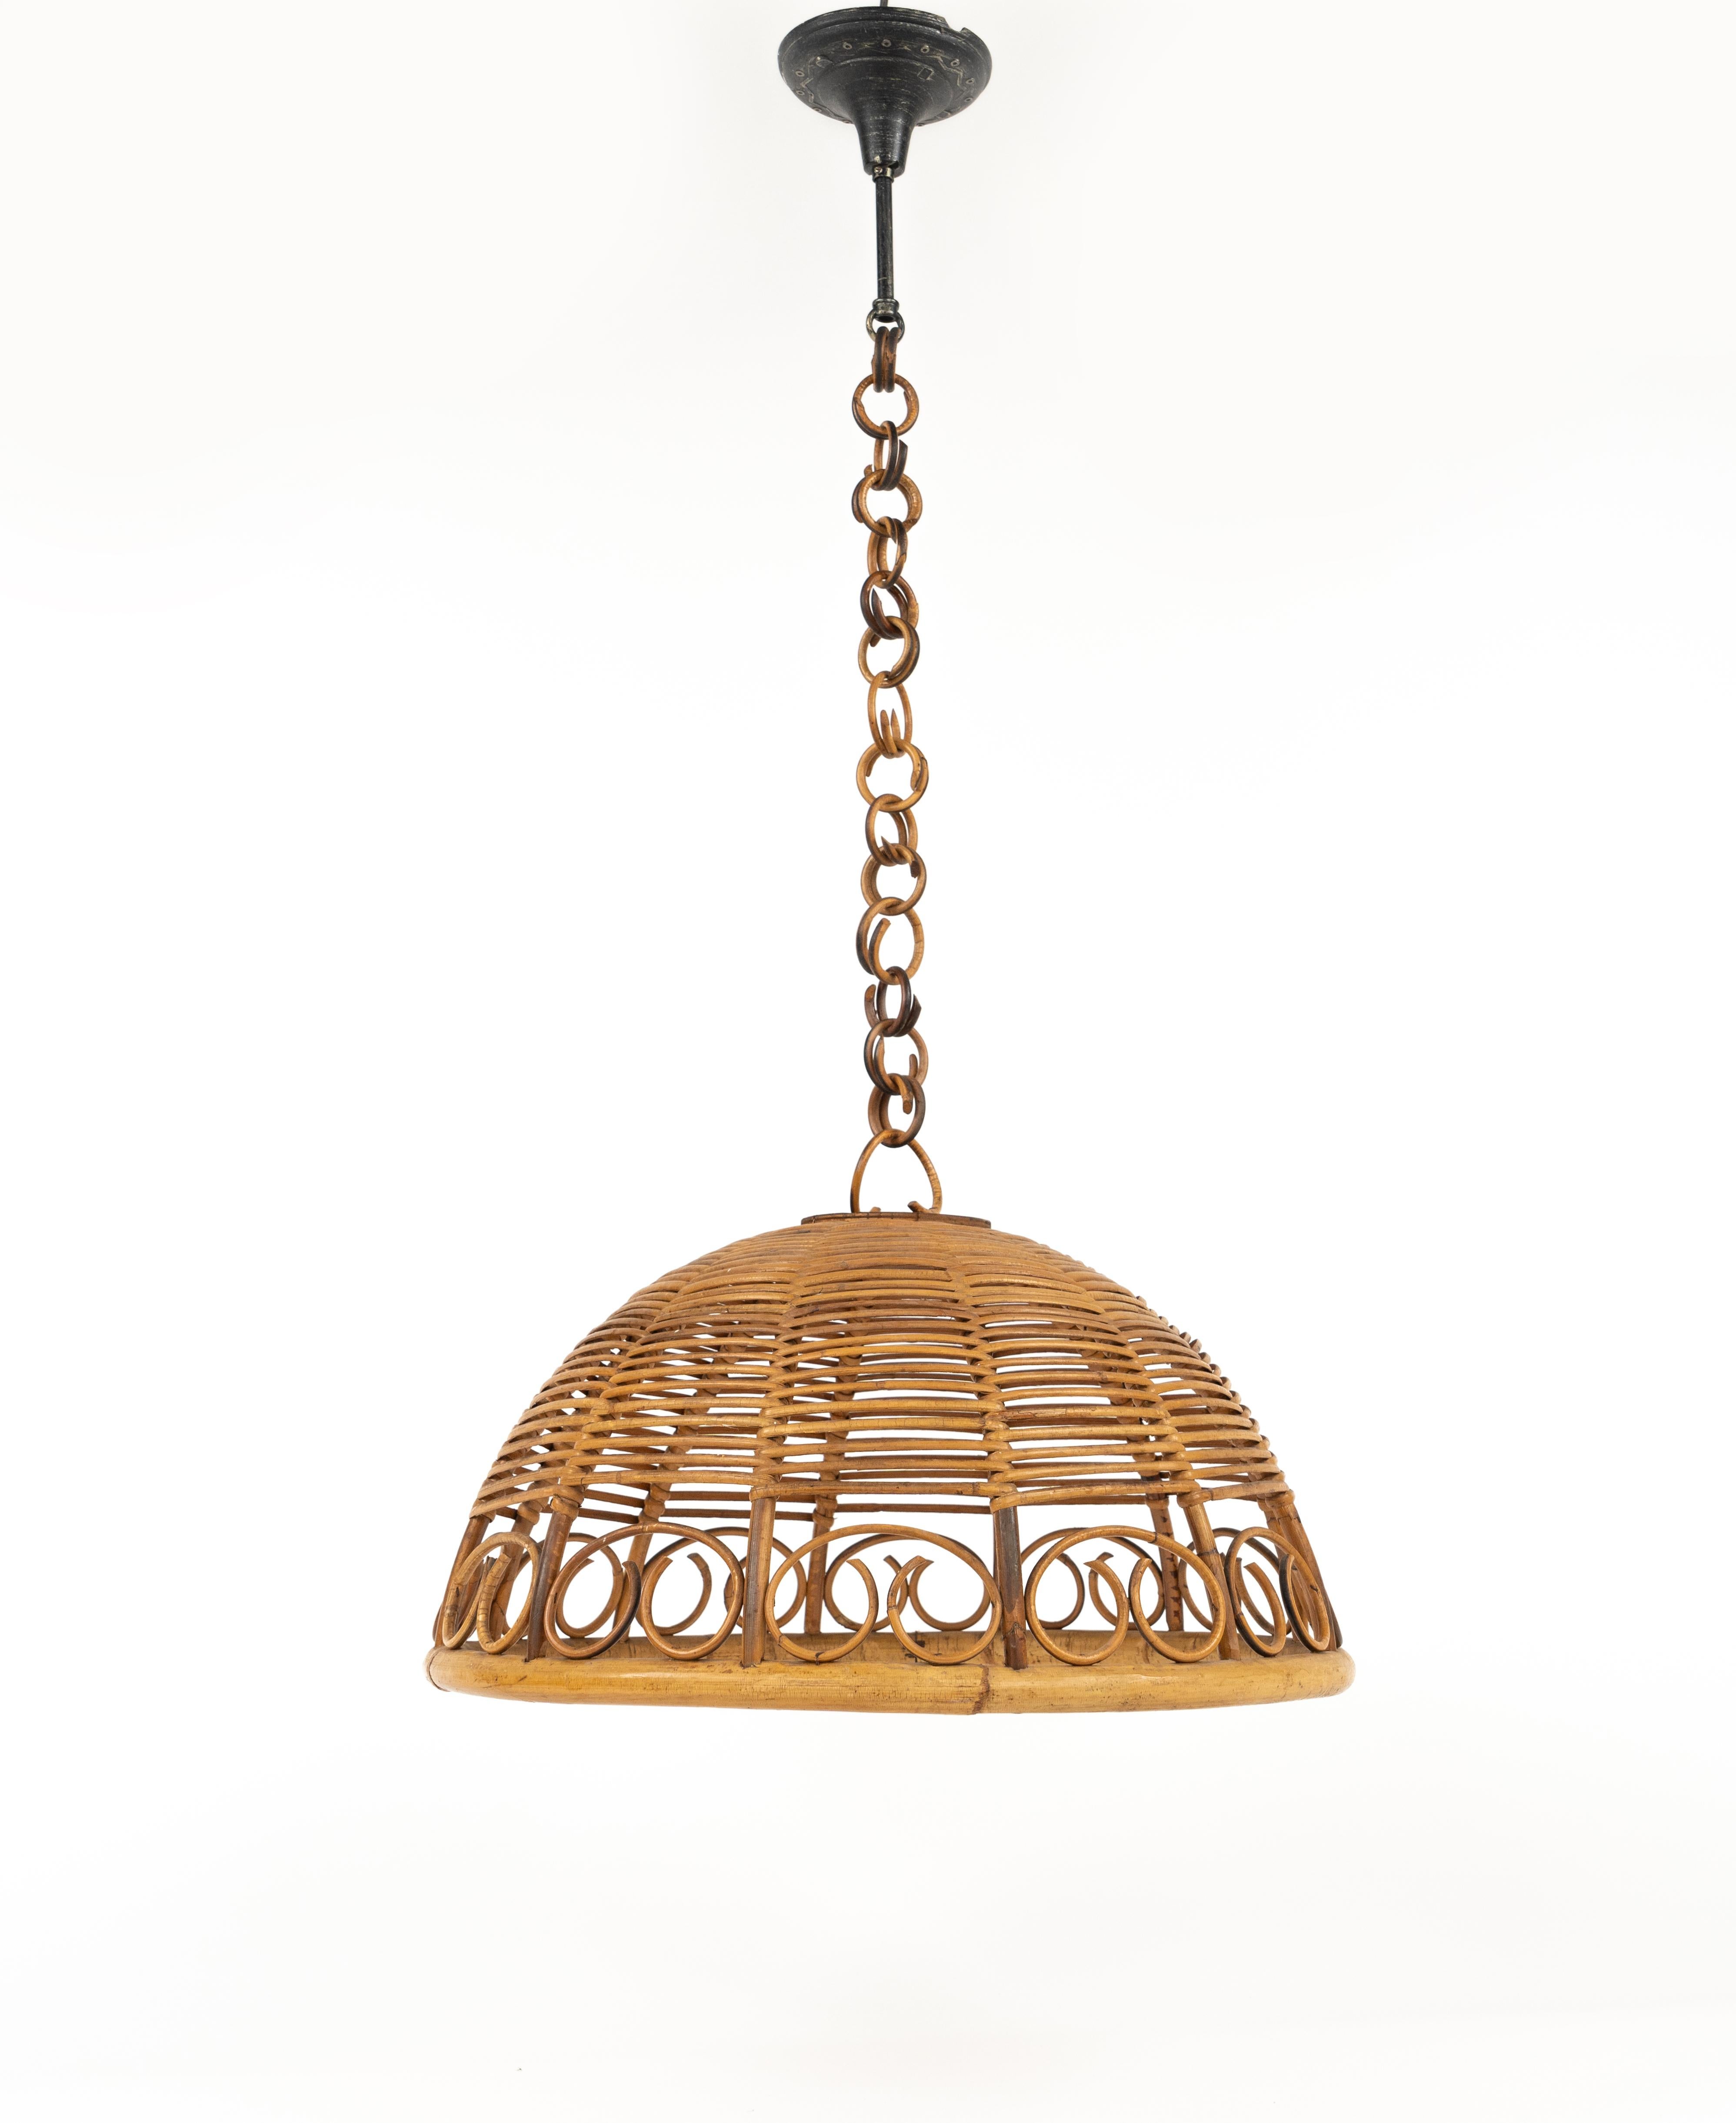 Mid-20th Century Midcentury Rattan and Bamboo Chandelier Pendant, Italy 1960s For Sale